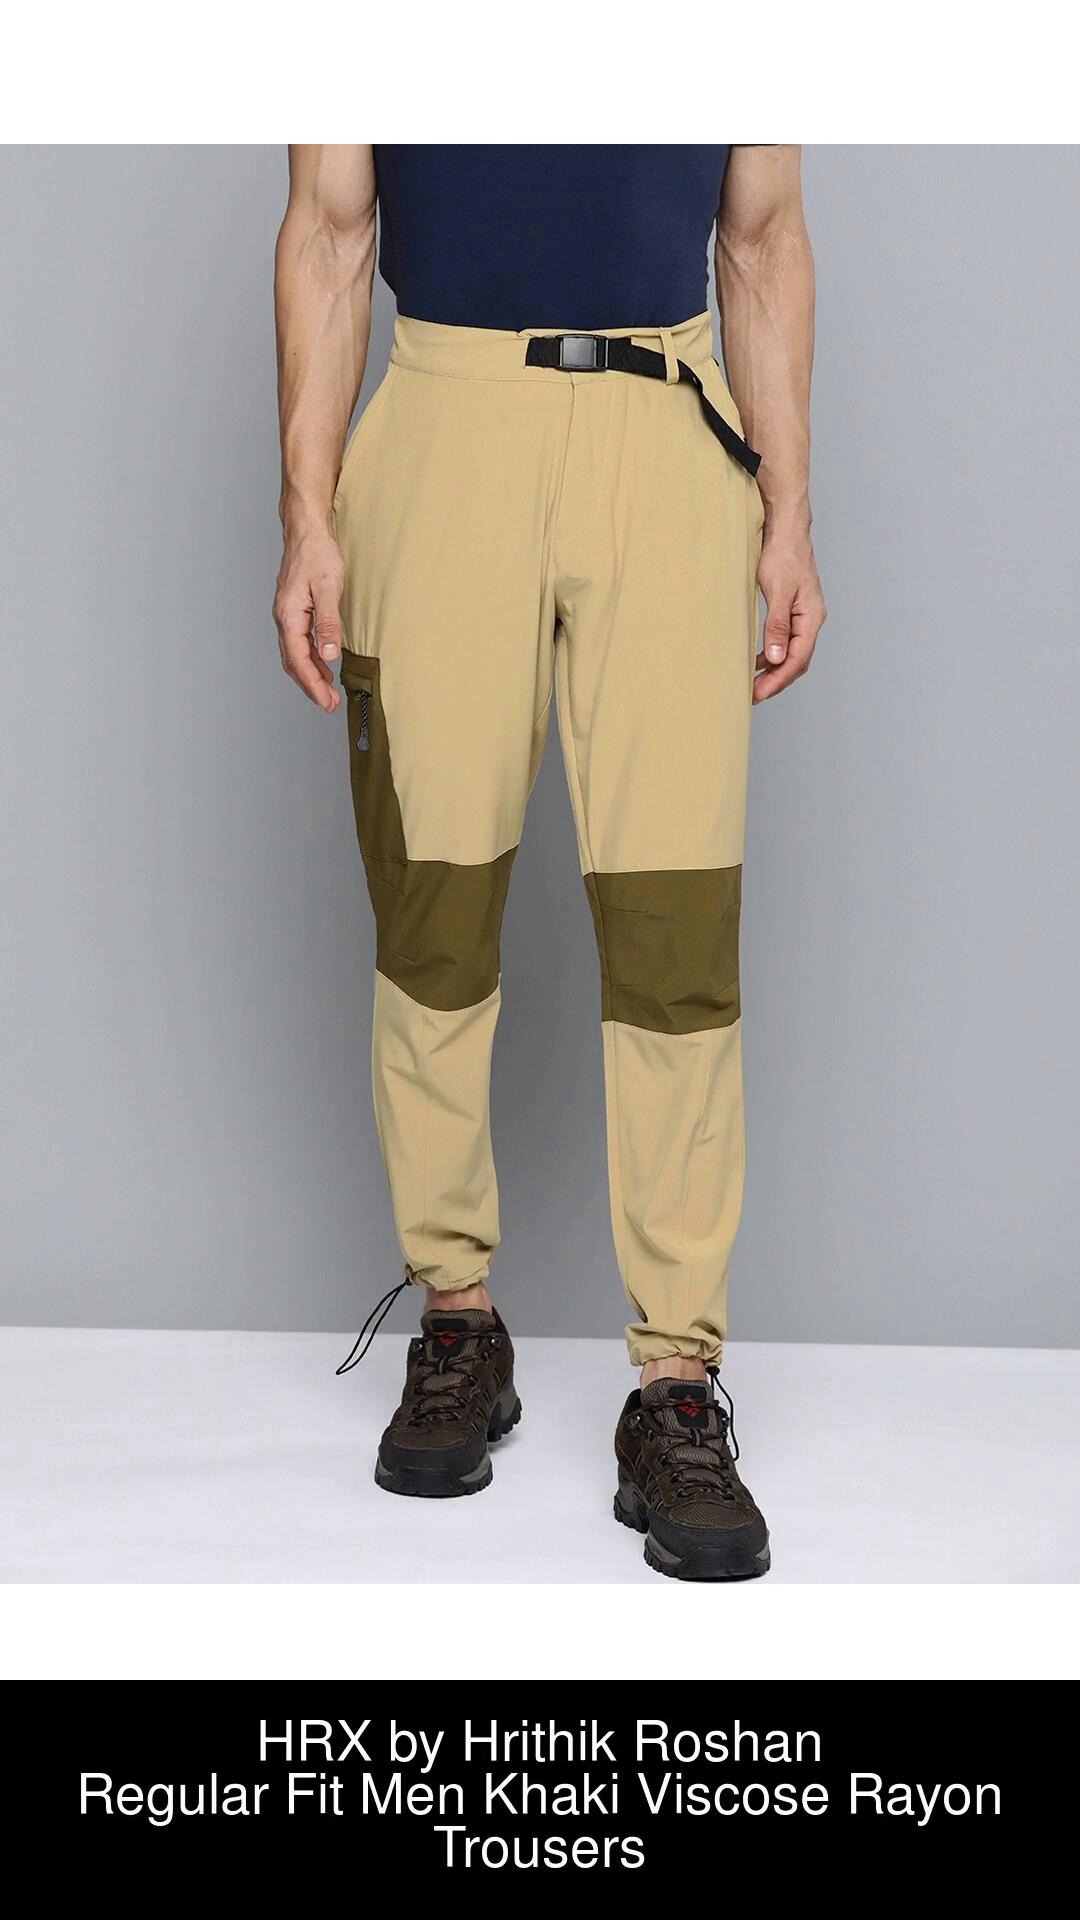 HRX by Hrithik Roshan Regular Fit Men Khaki Trousers - Buy HRX by Hrithik  Roshan Regular Fit Men Khaki Trousers Online at Best Prices in India